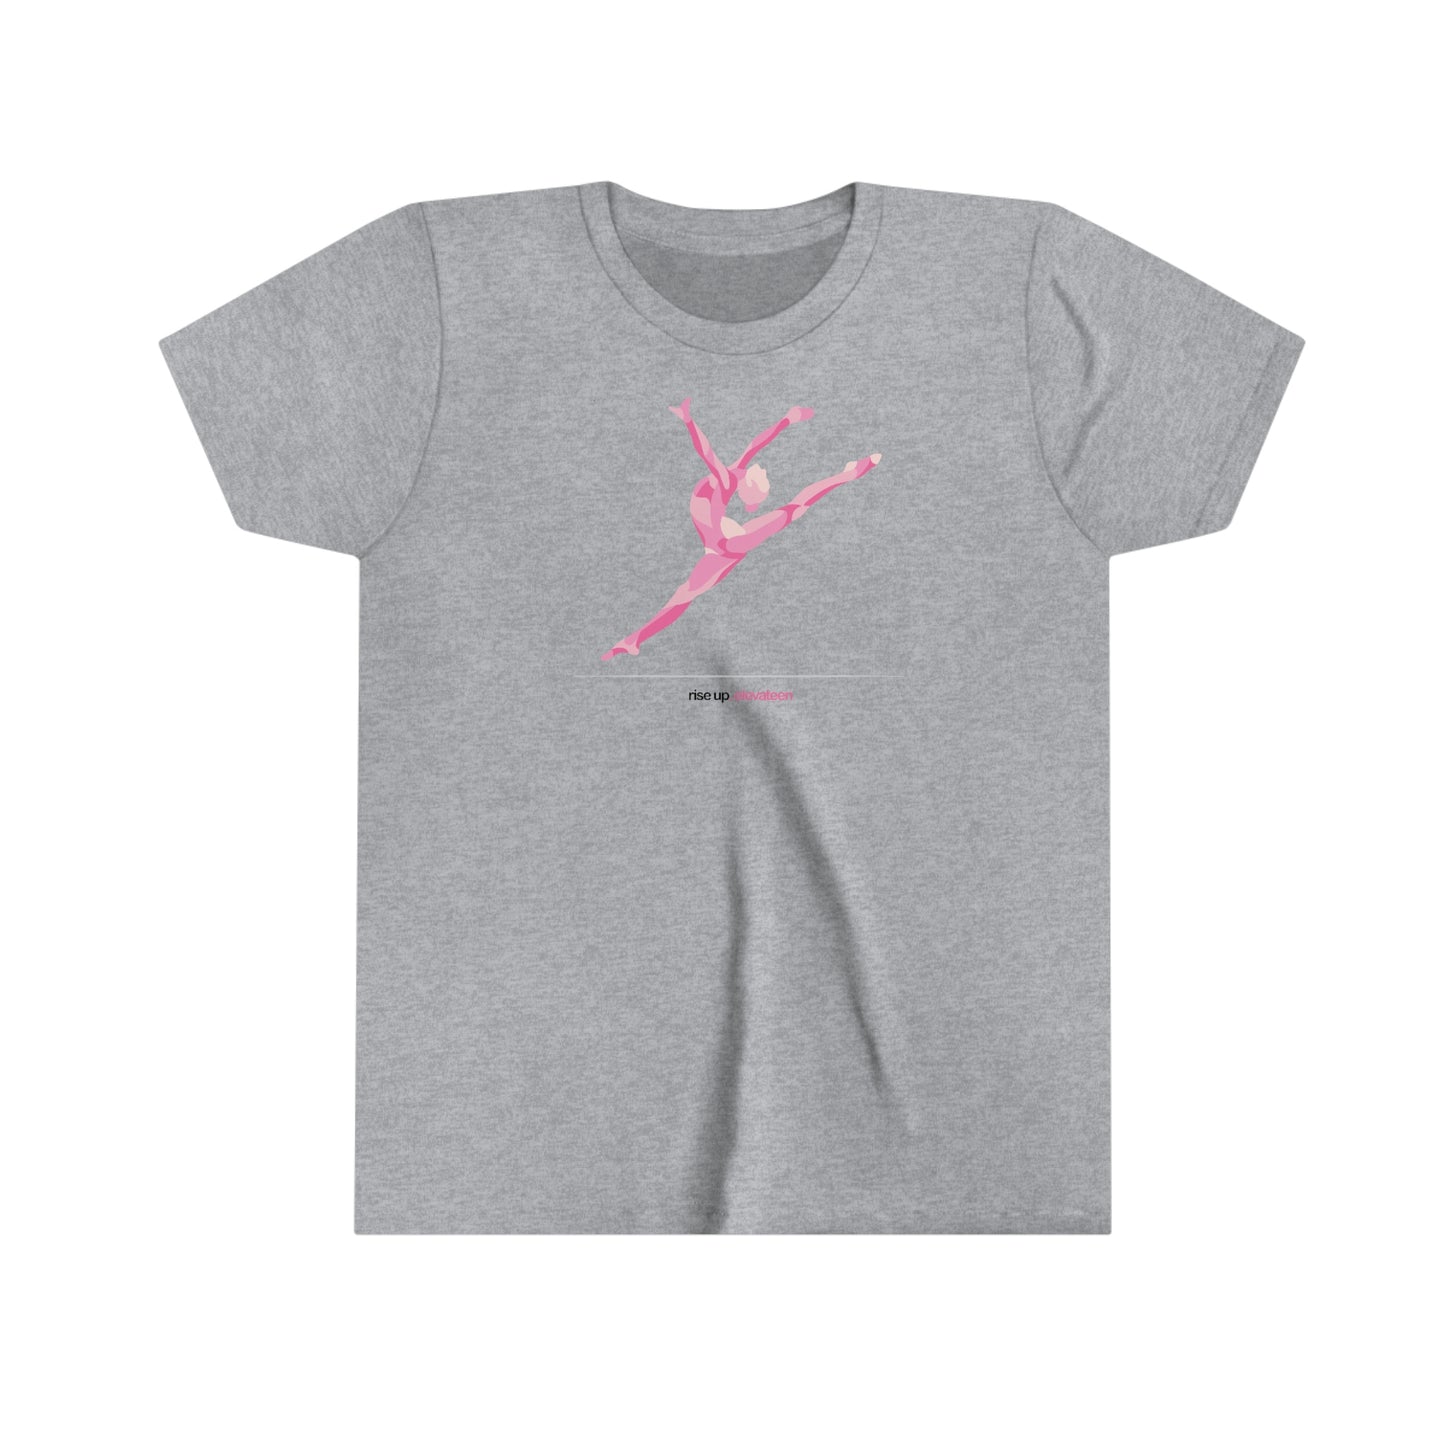 Kids | Gymnastics Girls / Youth tee / t-shirt | *RISE UP* Collection | 002p